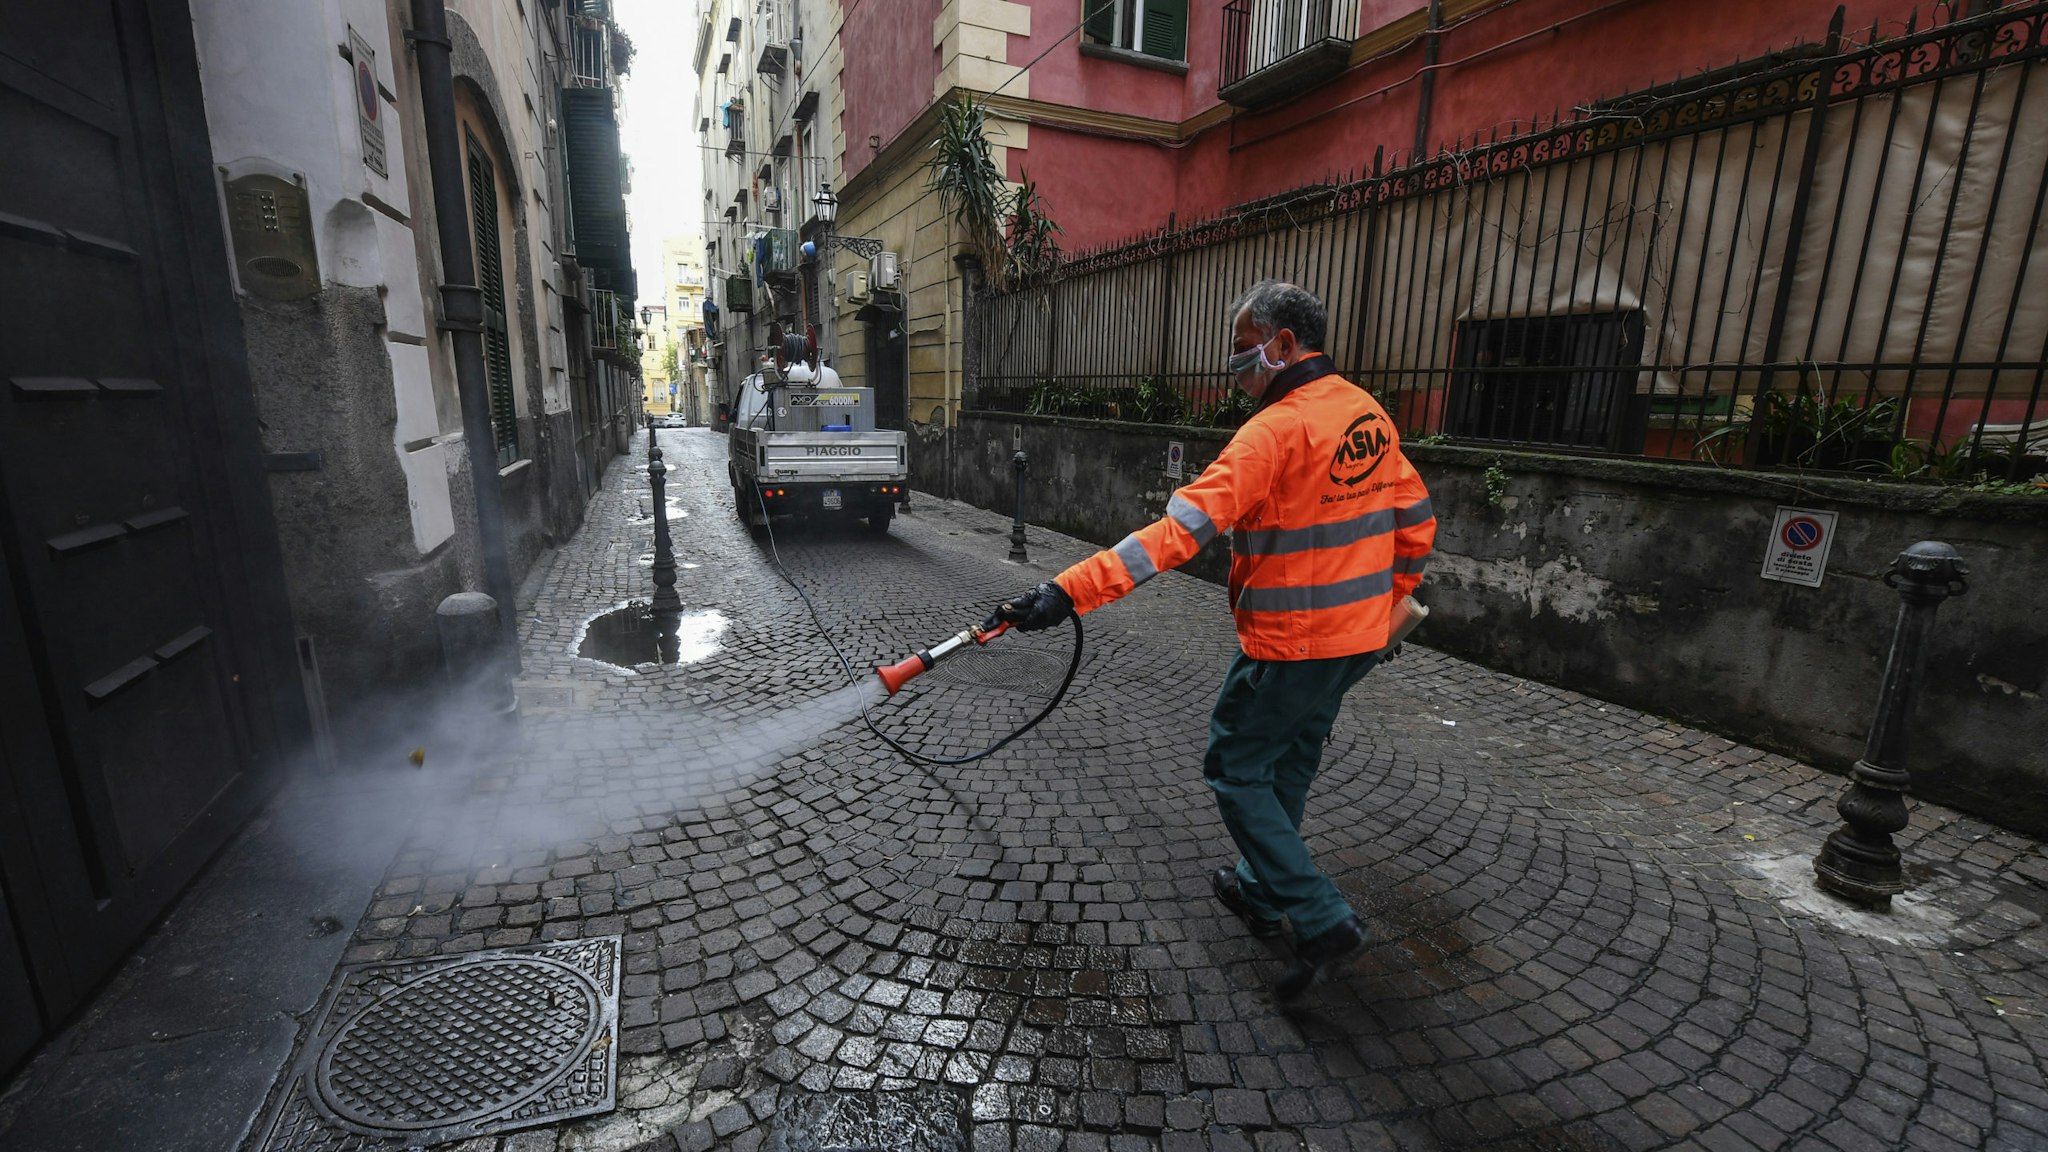 APLES, CAMPANIA, ITALY - 2020/03/31: Sanitary workers disinfect the streets of Naples city to counter the danger of a coronavirus infection (COVID 19). (Photo by Salvatore Laporta/KONTROLAB/LightRocket via Getty Images)